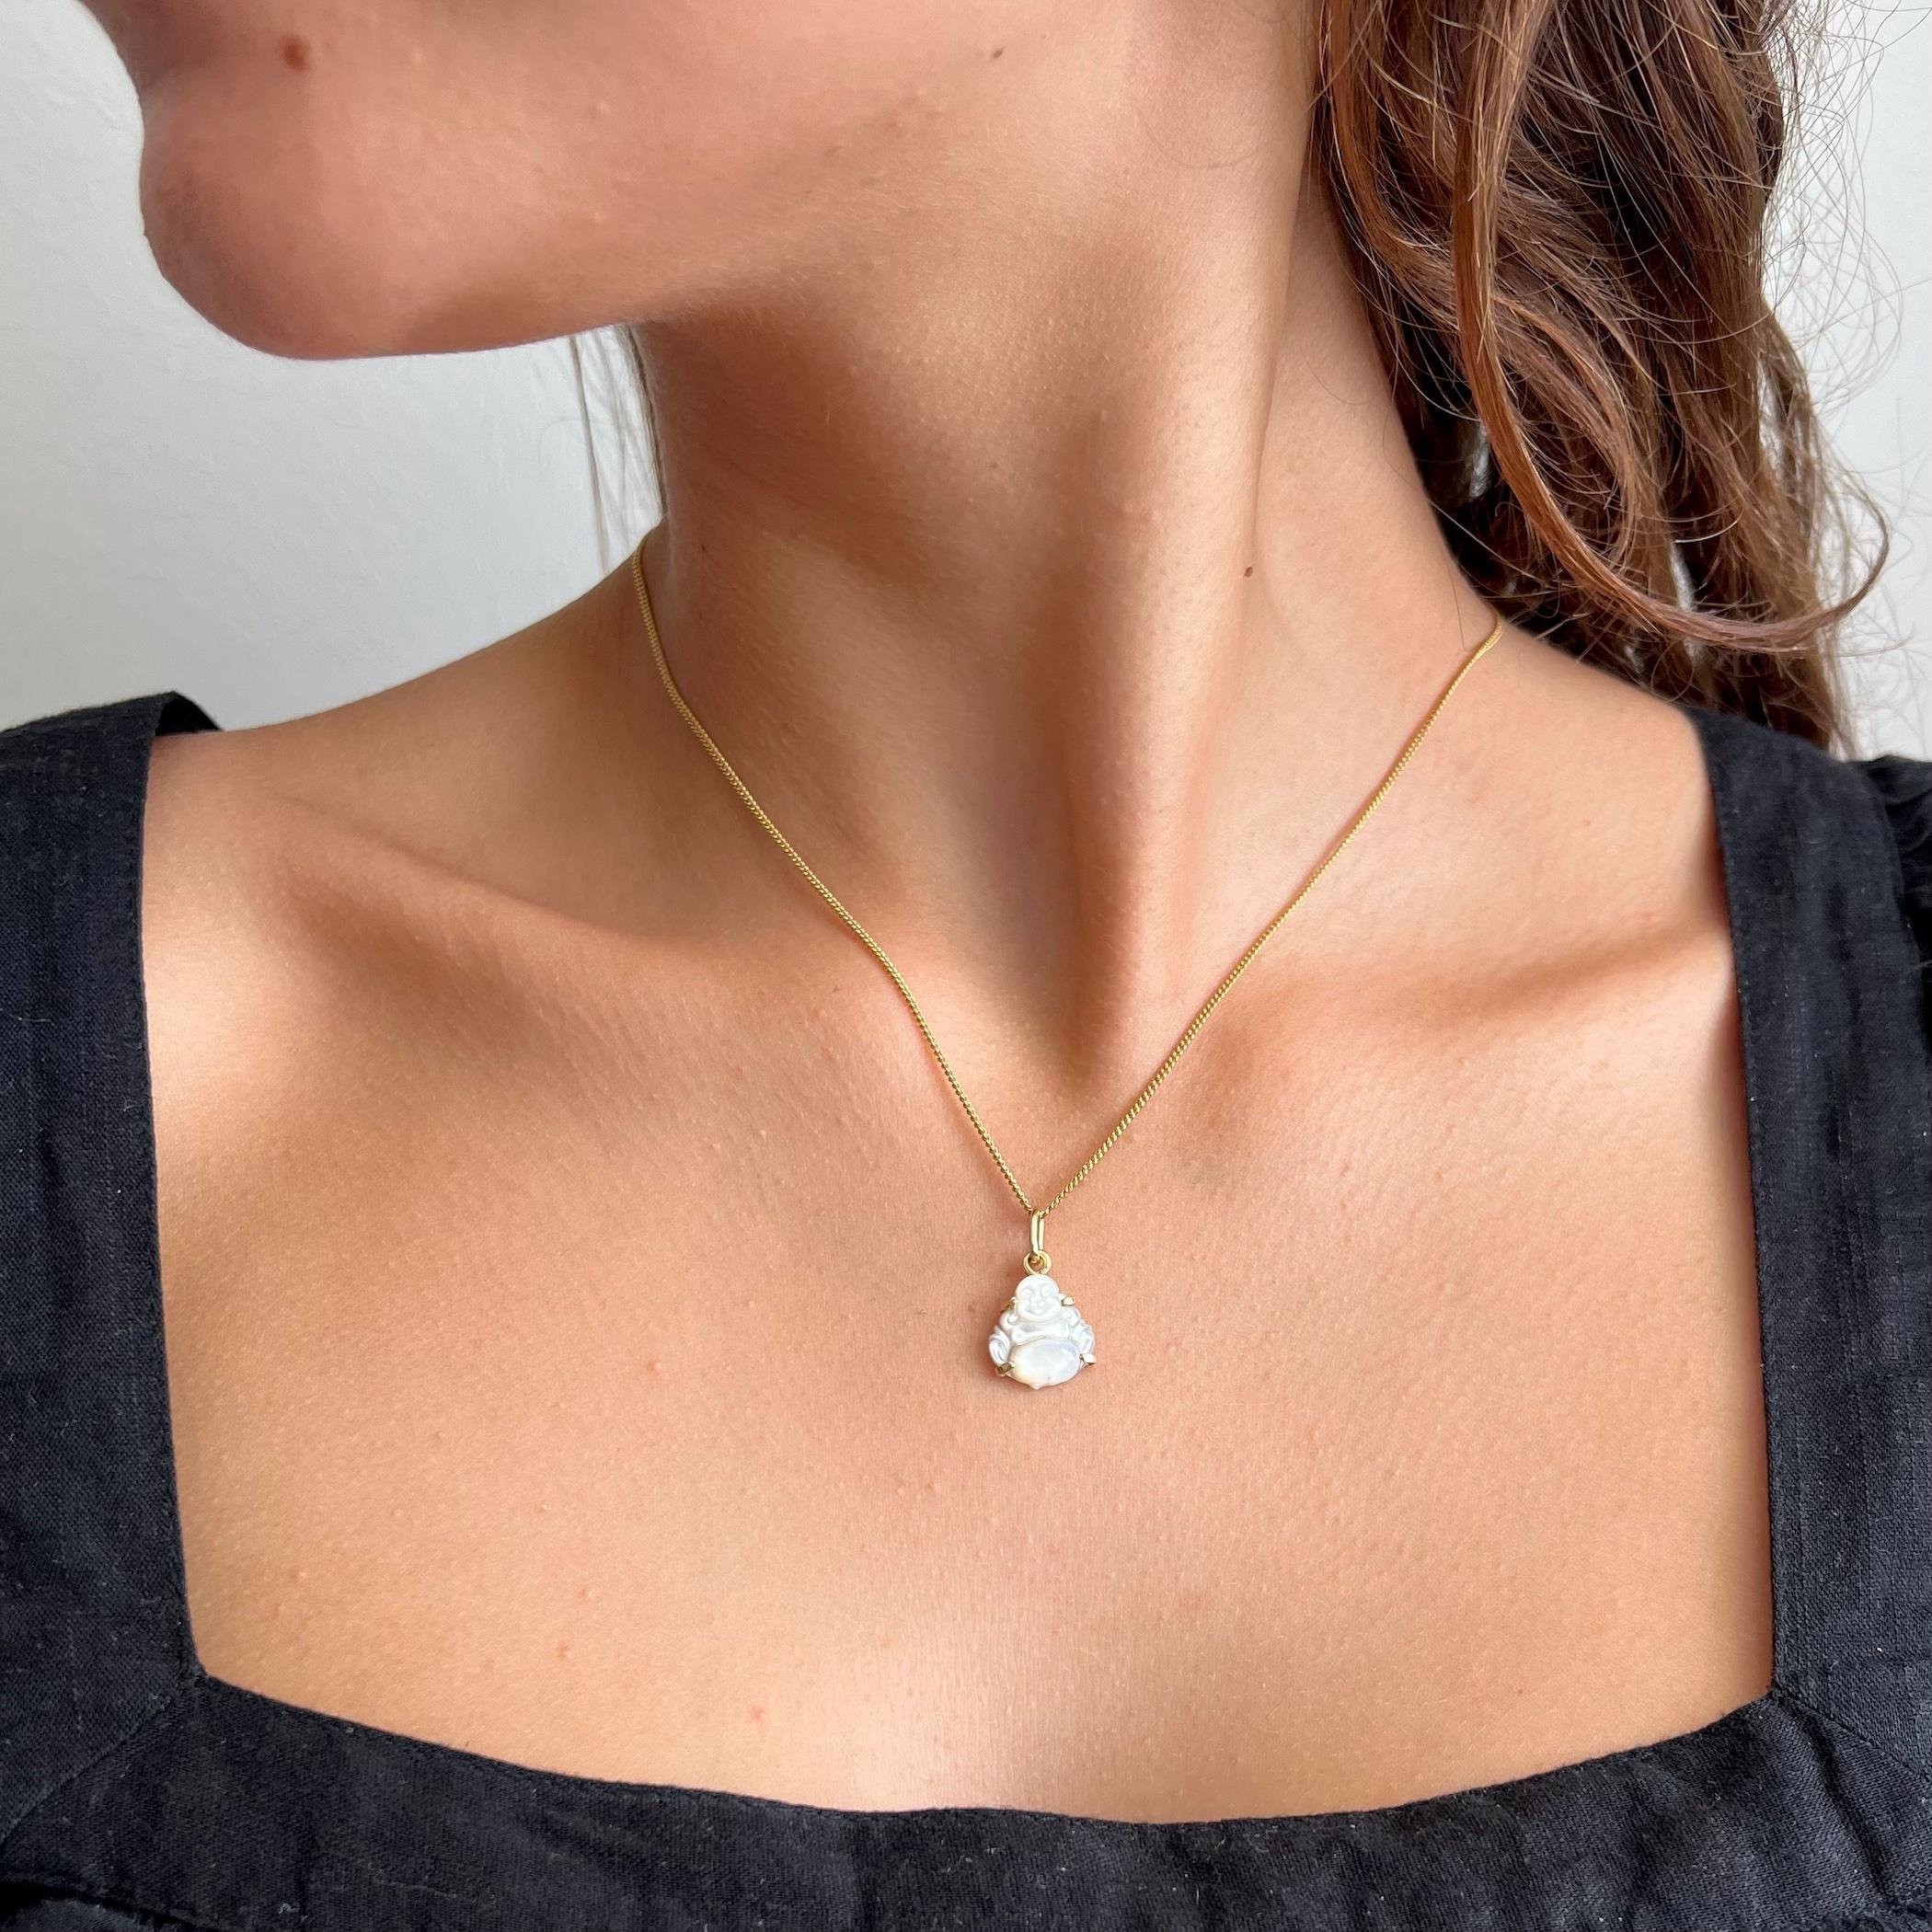 Mother of pearl, is an organic–inorganic composite material produced by some molluscs as an inner shell layer; it is strong, resilient, and iridescent. This vintage buddha charm pendant is made from this beautiful mother of pearl inner shell. The